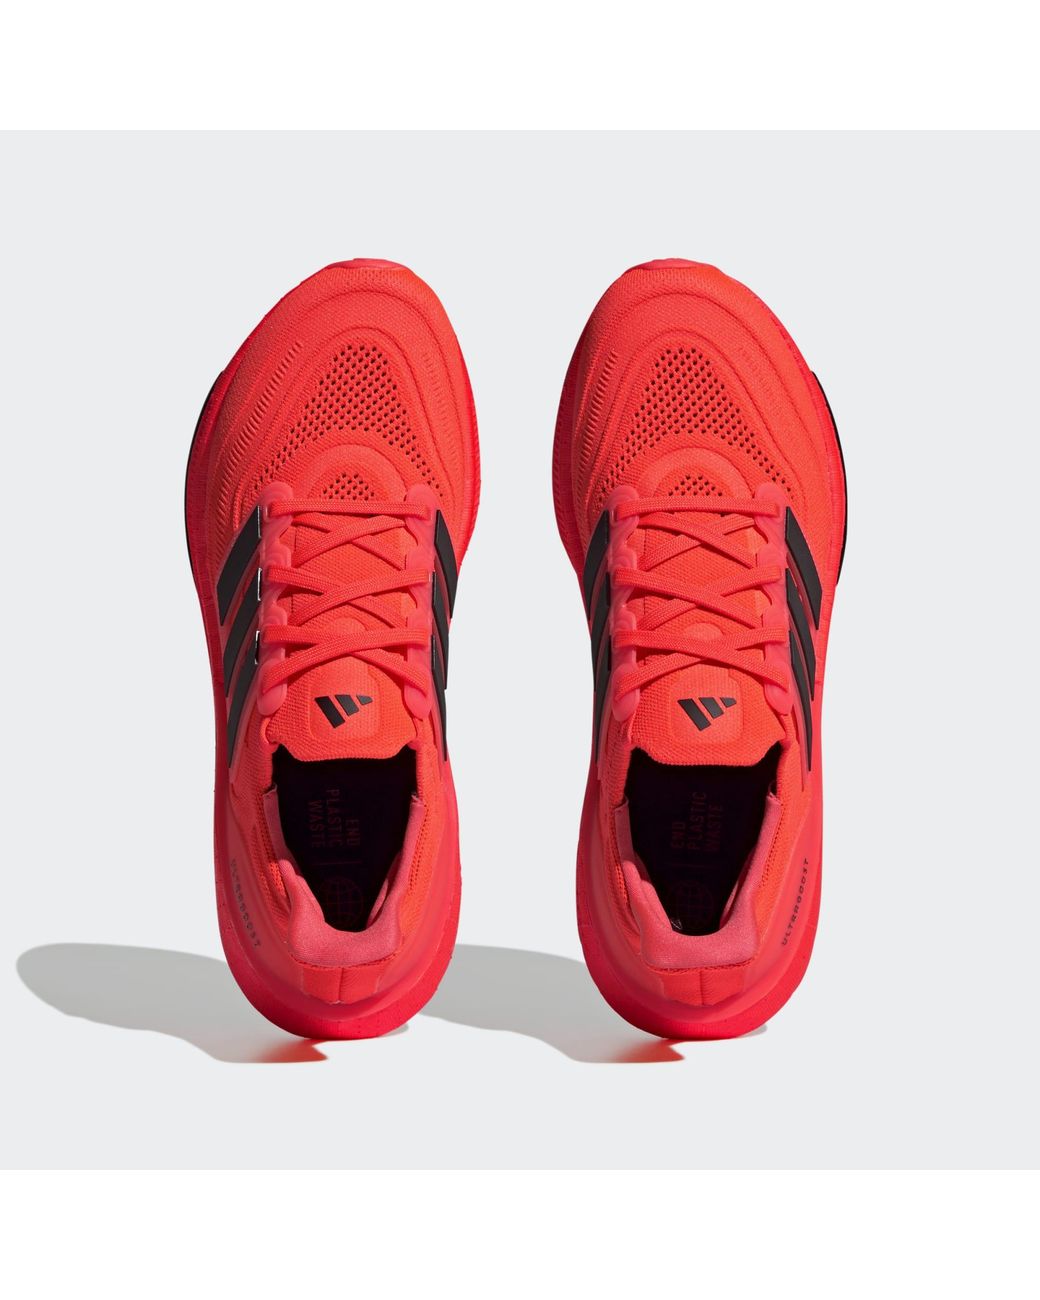 adidas Ultraboost Light Shoes in Red | Lyst UK